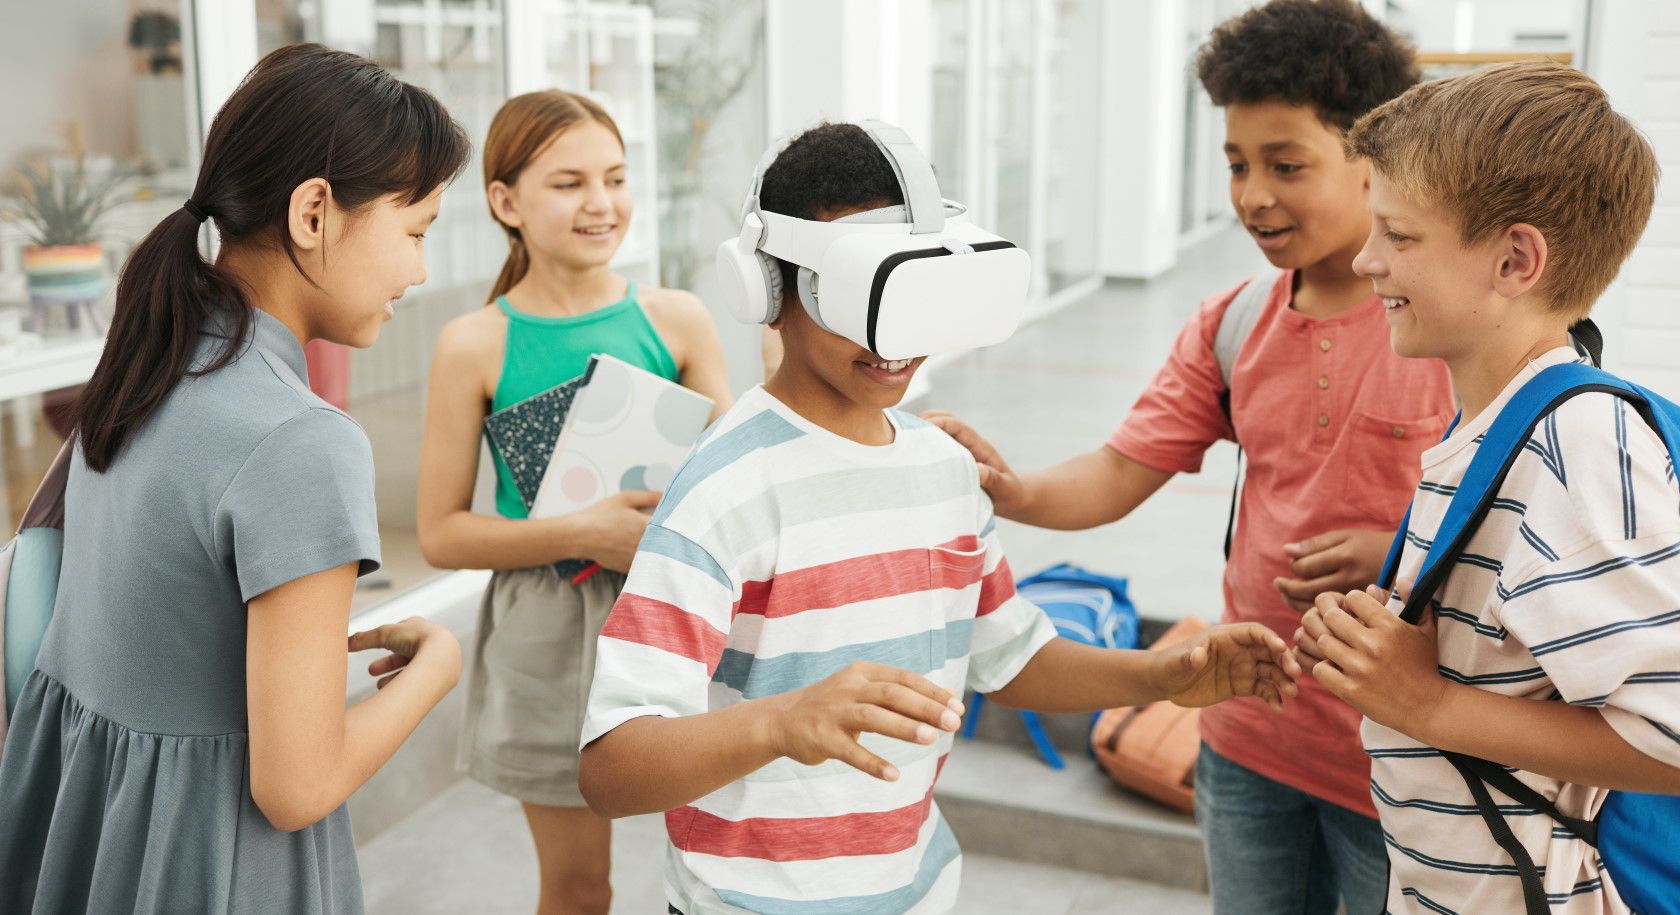 Group of children laughing and watching child wearing virtual reality headset